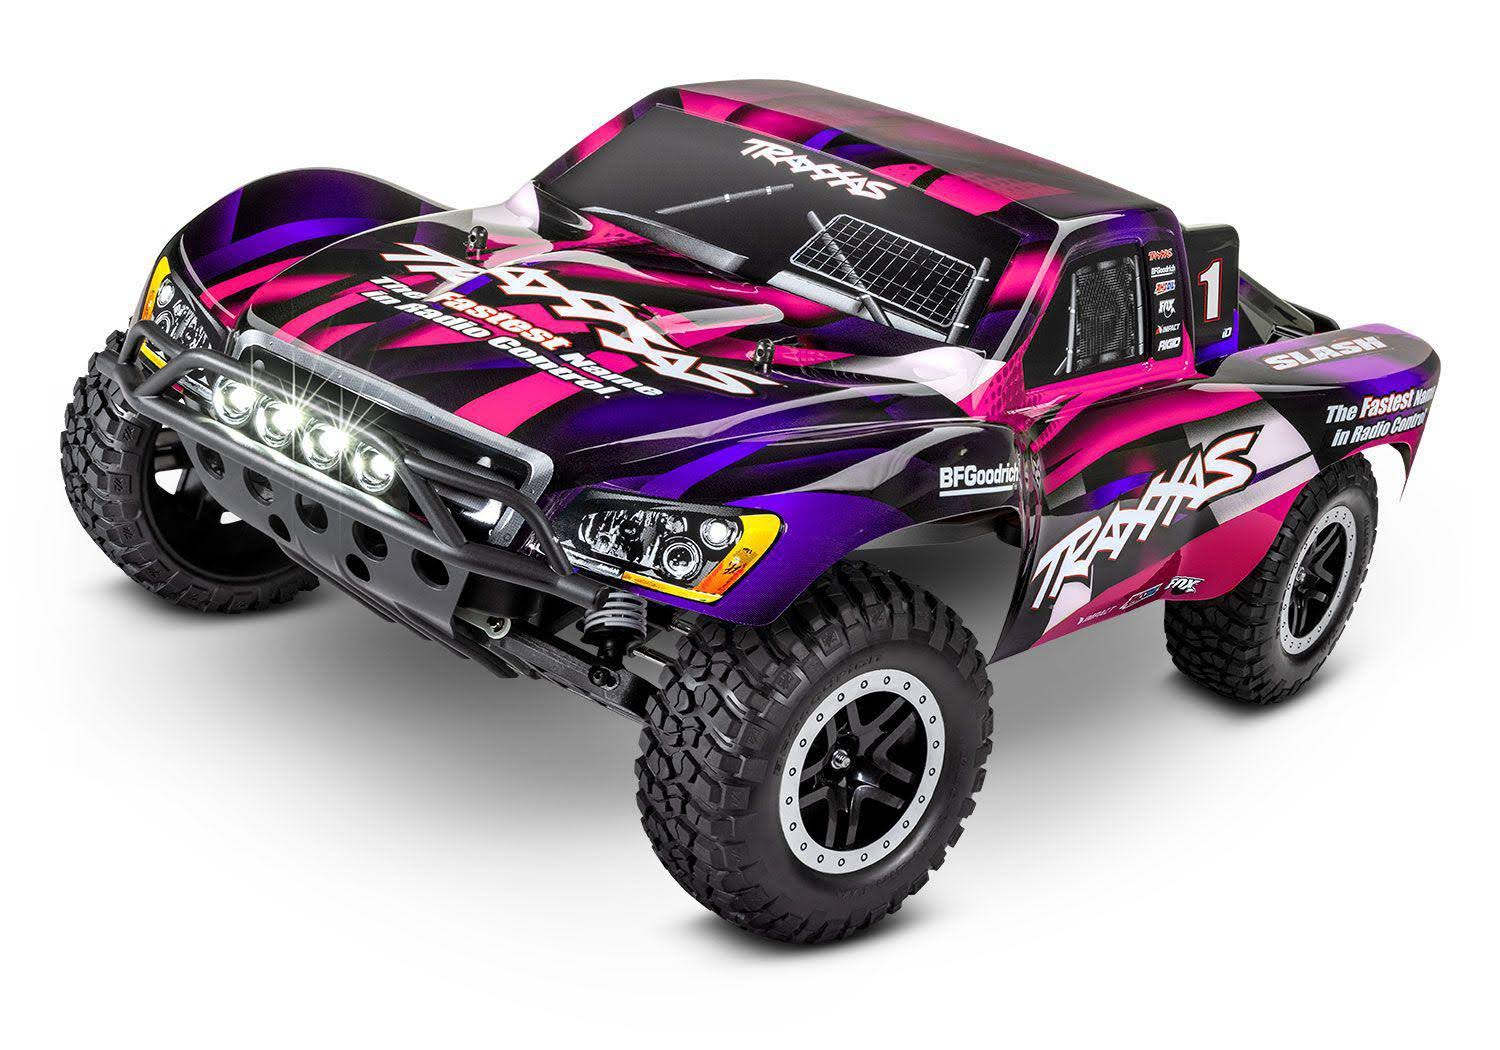 Traxxas Slash RTR 2WD Brushed with Battery and Charger Pink with LED RC Car